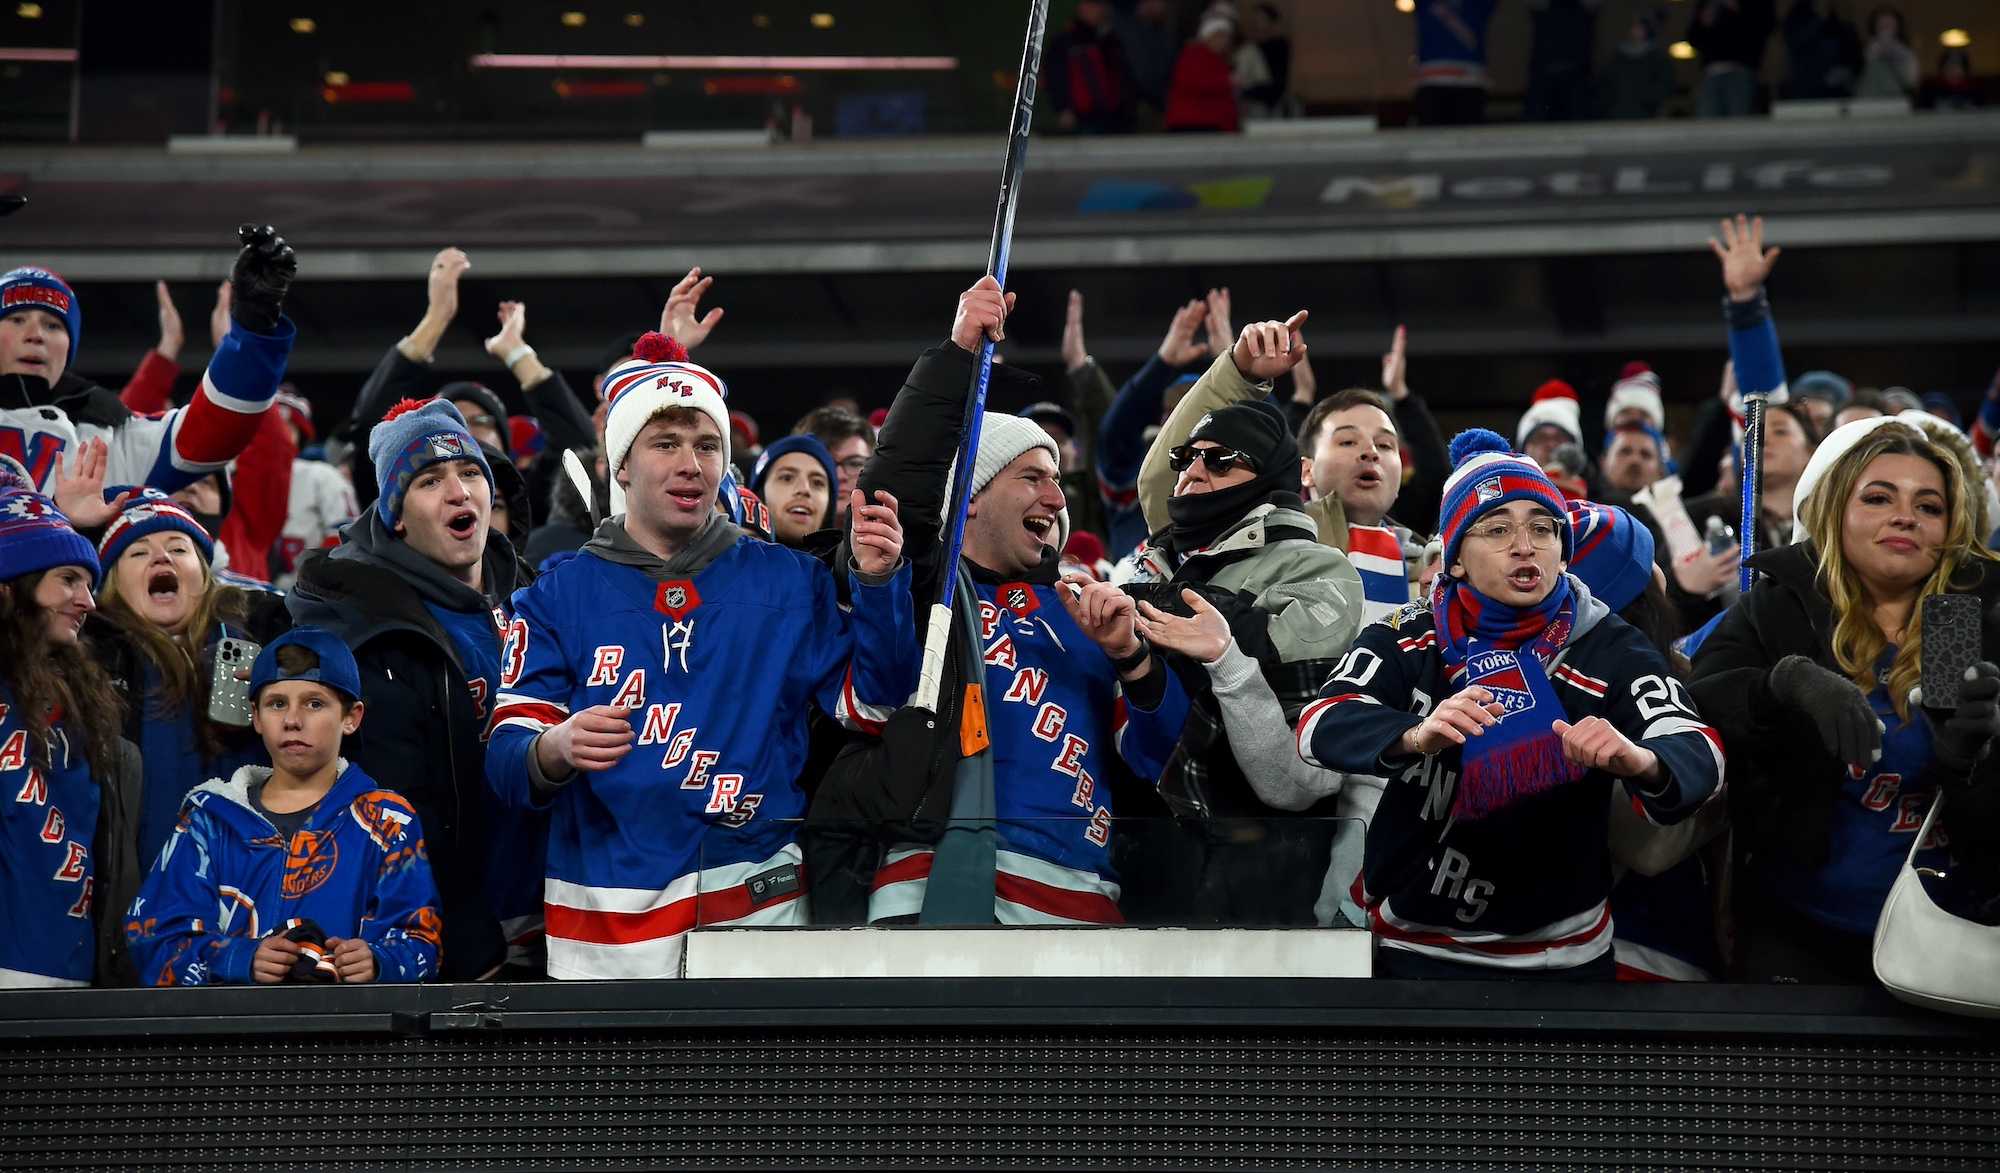 EAST RUTHERFORD, NEW JERSEY - FEBRUARY 18: New York Rangers fans cheer on after the 2024 Navy Federal Credit Union Stadium Series game between the New York Rangers and the New York Islanders at MetLife Stadium on February 18, 2024 in East Rutherford, New Jersey. The Rangers defeated the Islanders 6-5 in overtime. (Photo by Brian Babineau/NHLI via Getty Images)